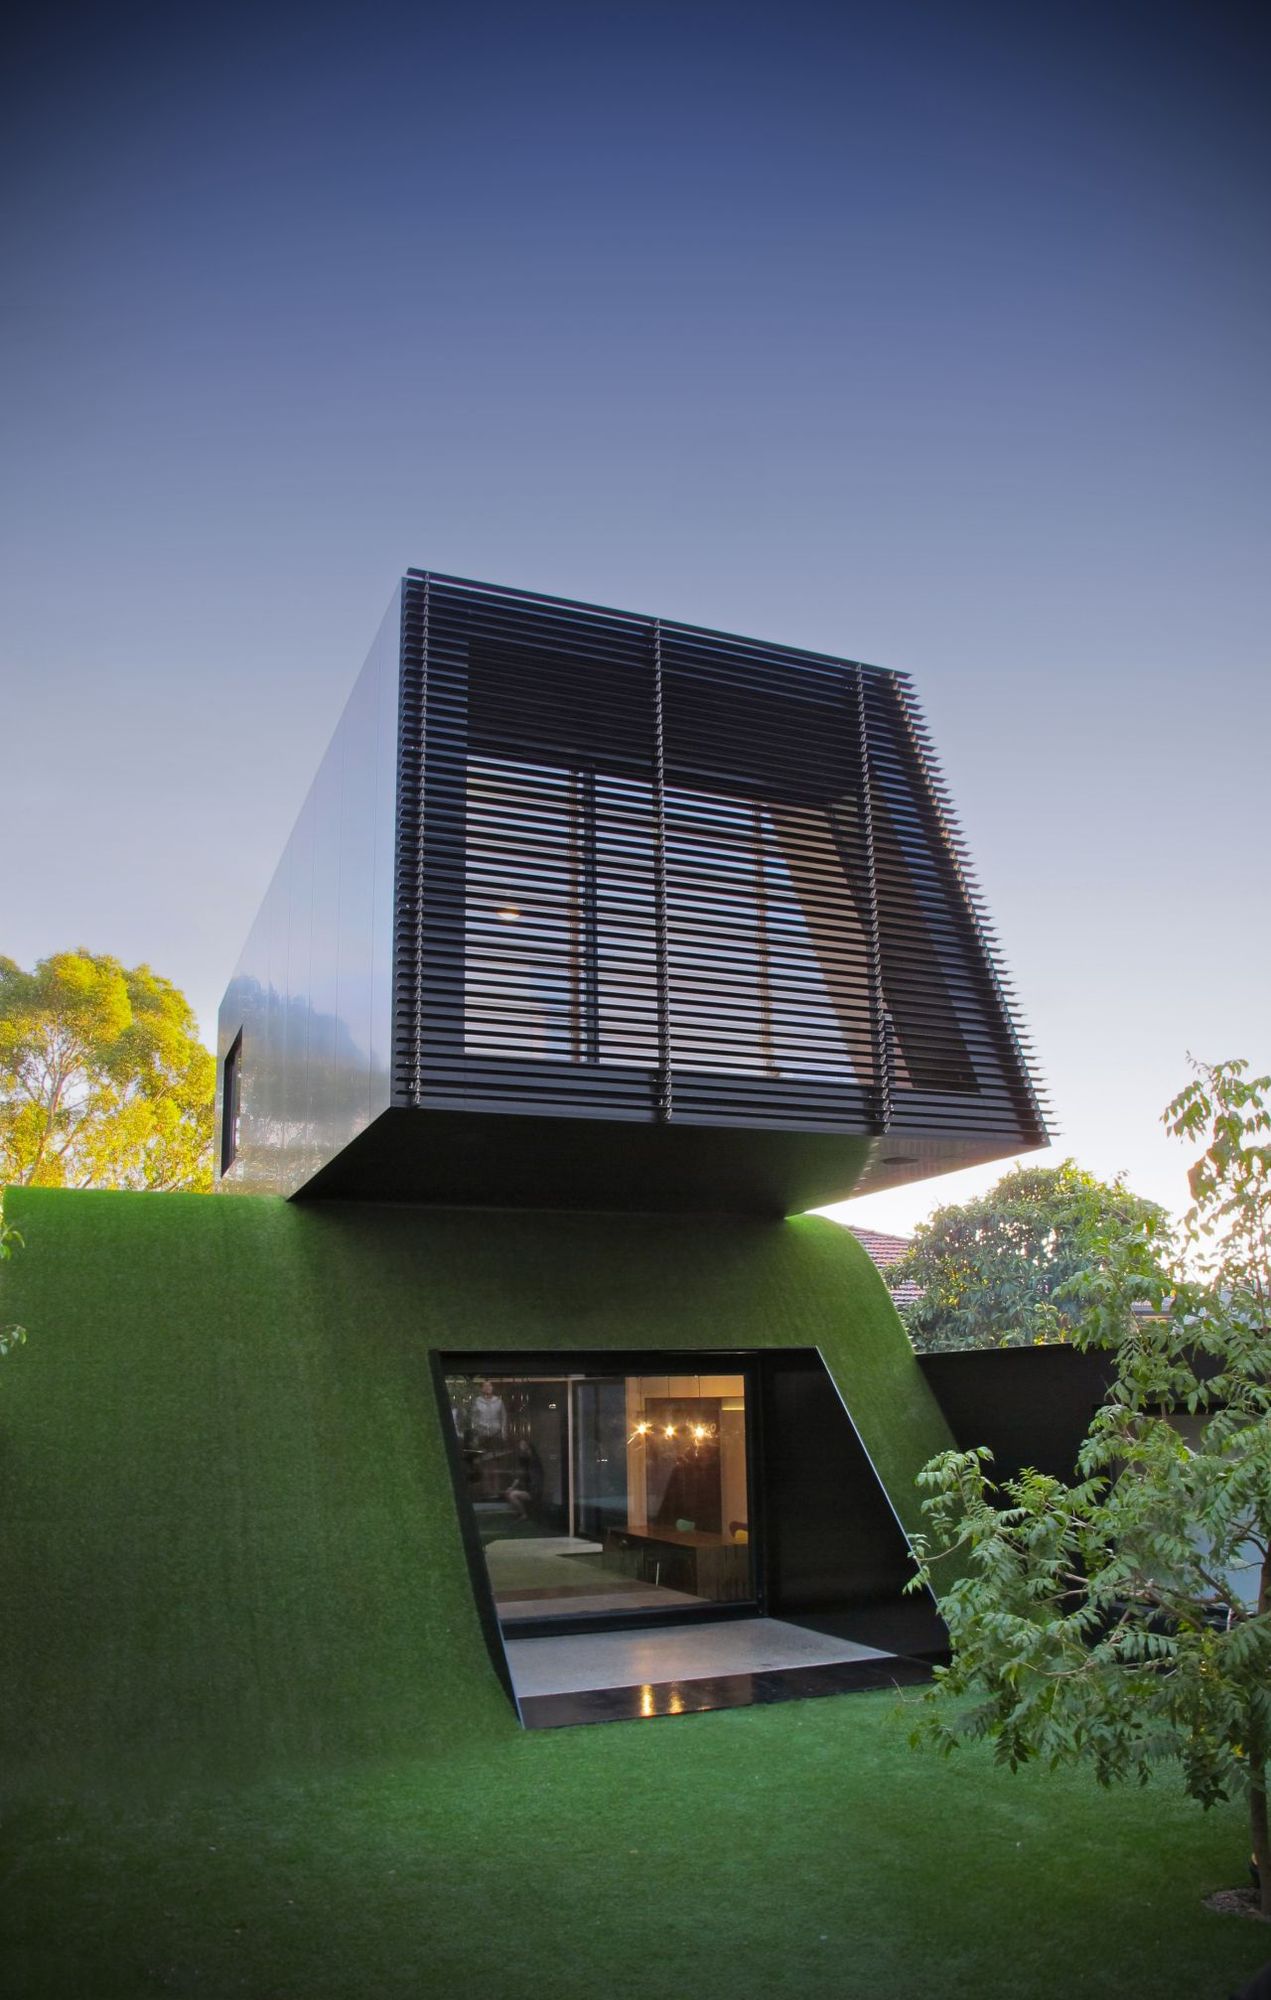 Hill House: They Built a Sunny Living Area Under a Grassy ...